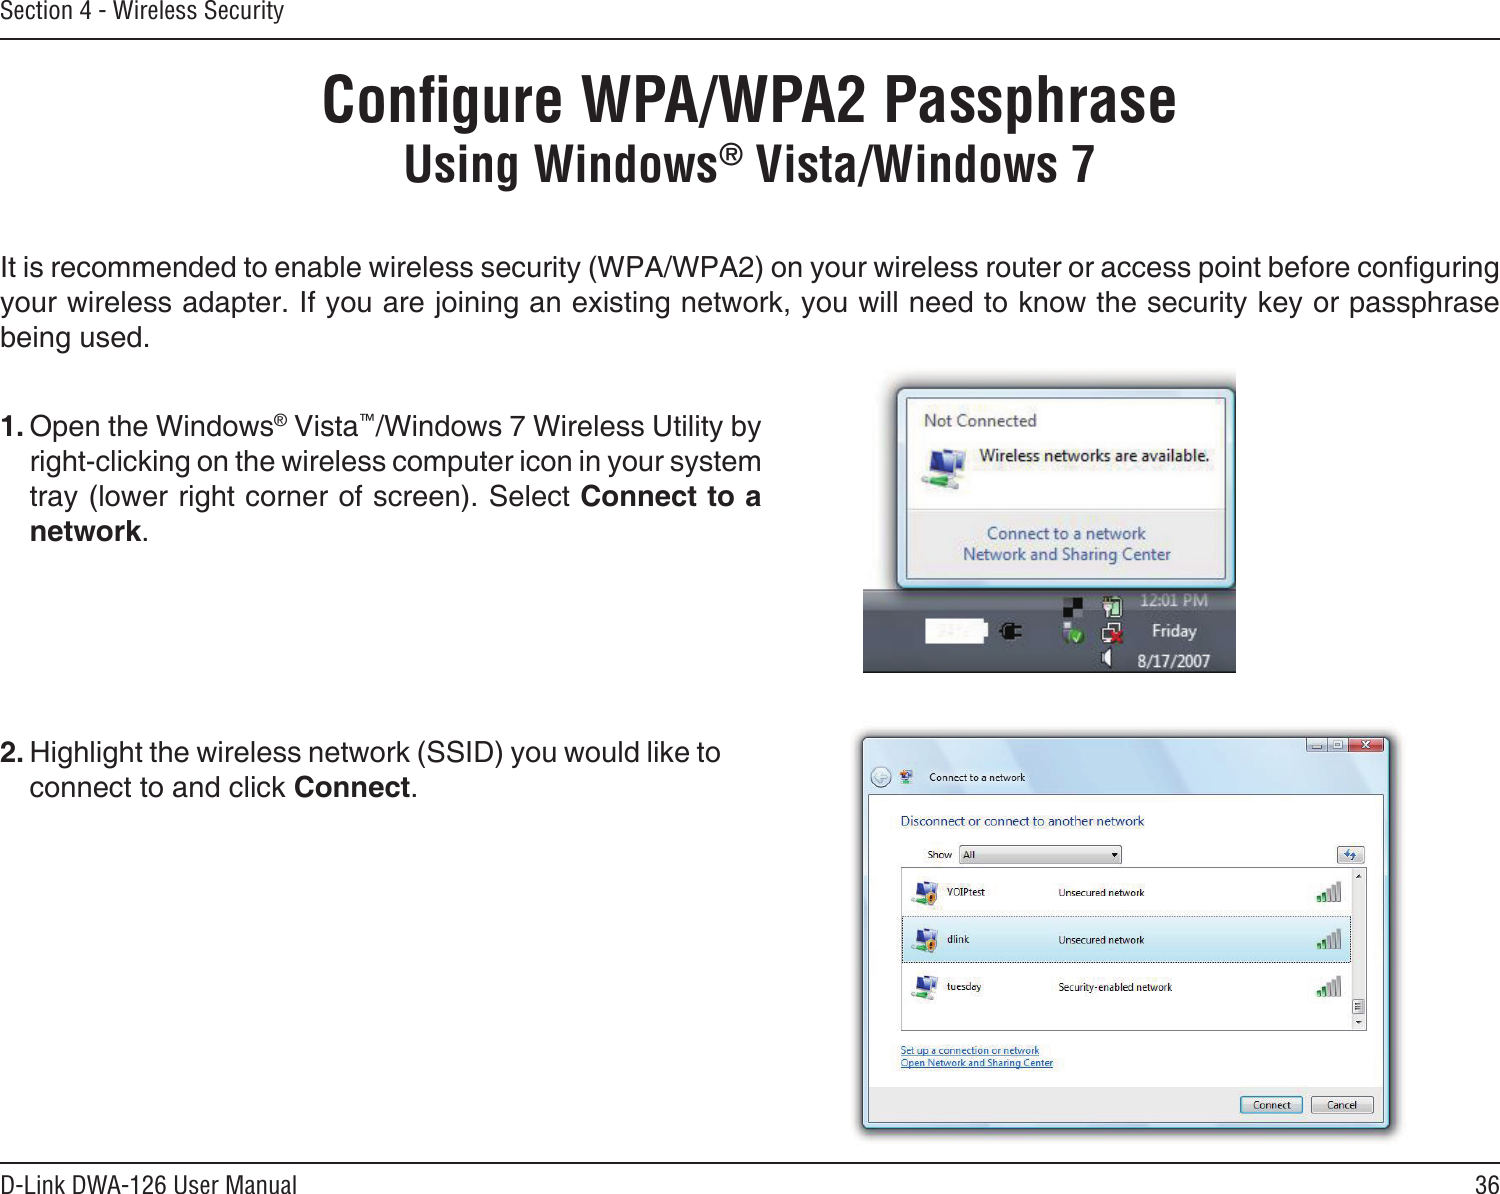 36D-Link DWA-126 User ManualSection 4 - Wireless SecurityConﬁgure WPA/WPA2 PassphraseUsing Windows® Vista/Windows 7It is recommended to enable wireless security (WPA/WPA2) on your wireless router or access point before conguring your wireless adapter. If you are joining an existing network, you will need to know the security key or passphrase being used.2. Highlight the wireless network (SSID) you would like to connect to and click Connect.1. Open the Windows® Vista™/Windows 7 Wireless Utility by right-clicking on the wireless computer icon in your system tray (lower right corner of screen). Select Connect to a network. 